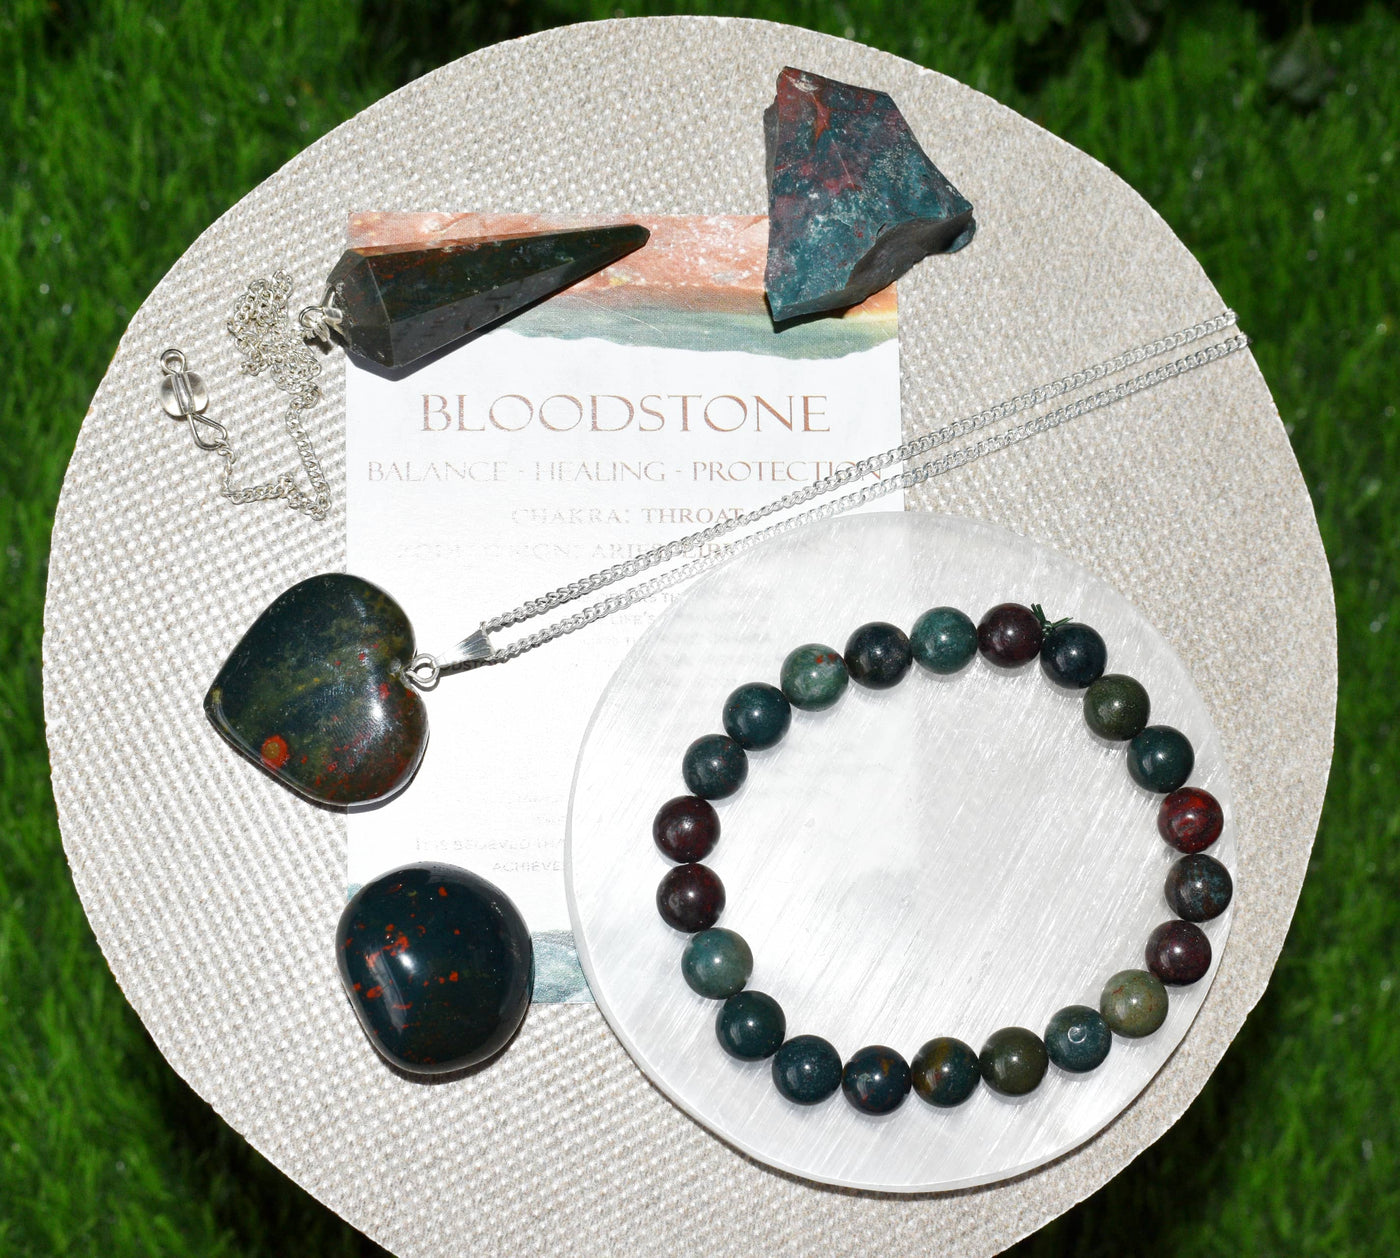 Bloodstone Crystal Gift Set For Emotional Support and Protection, Real Polished Gemstones.